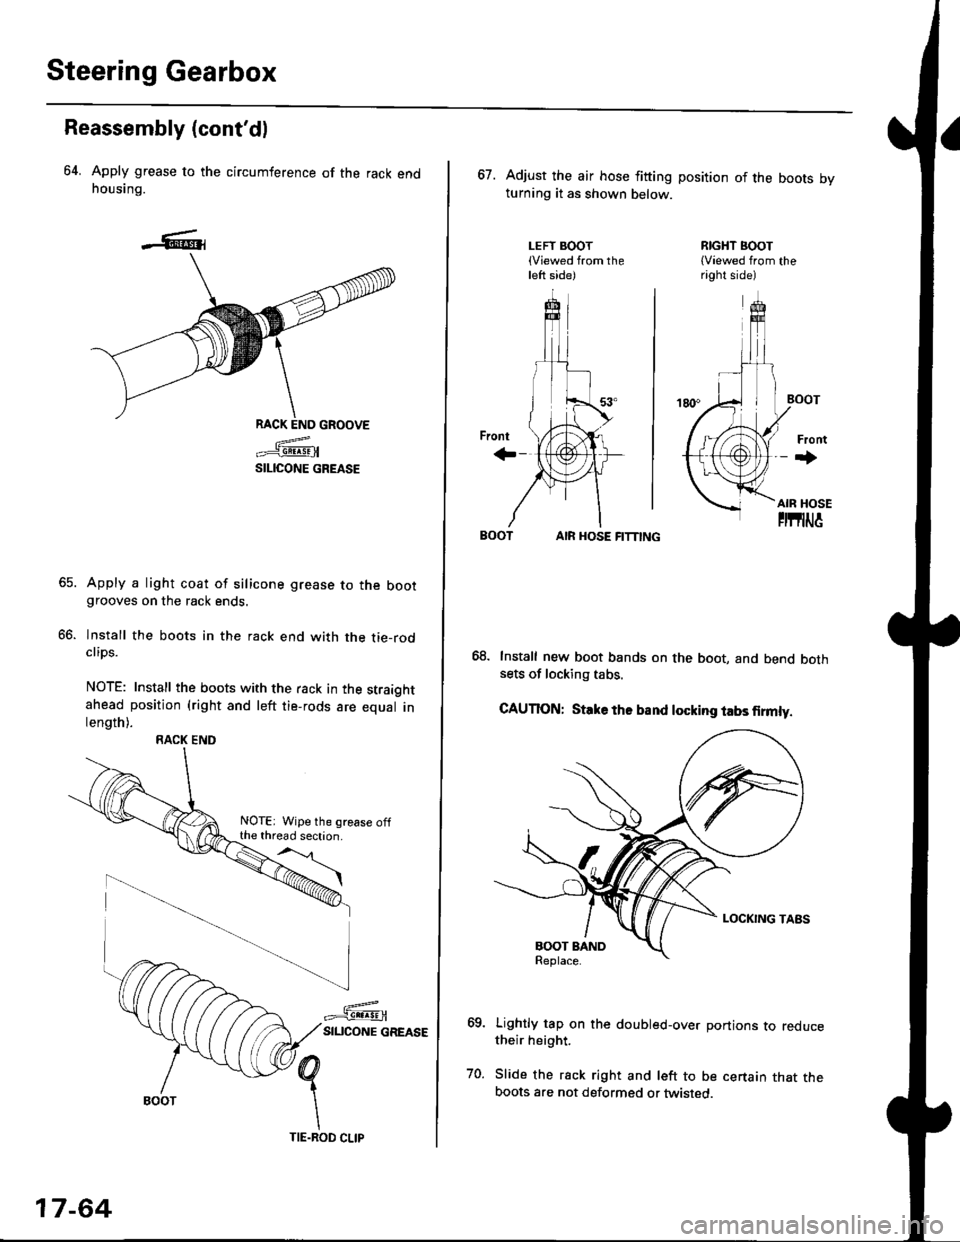 HONDA CIVIC 1998 6.G Service Manual Steering Gearbox
Reassembly (contdl
64. Apply grease to the circumference of the rack endhousing.
RACK END GROOVE
=^.#-q!:s!!H
SILICONE GREASE
Apply a light coat of silicone grease to the bootgrooves